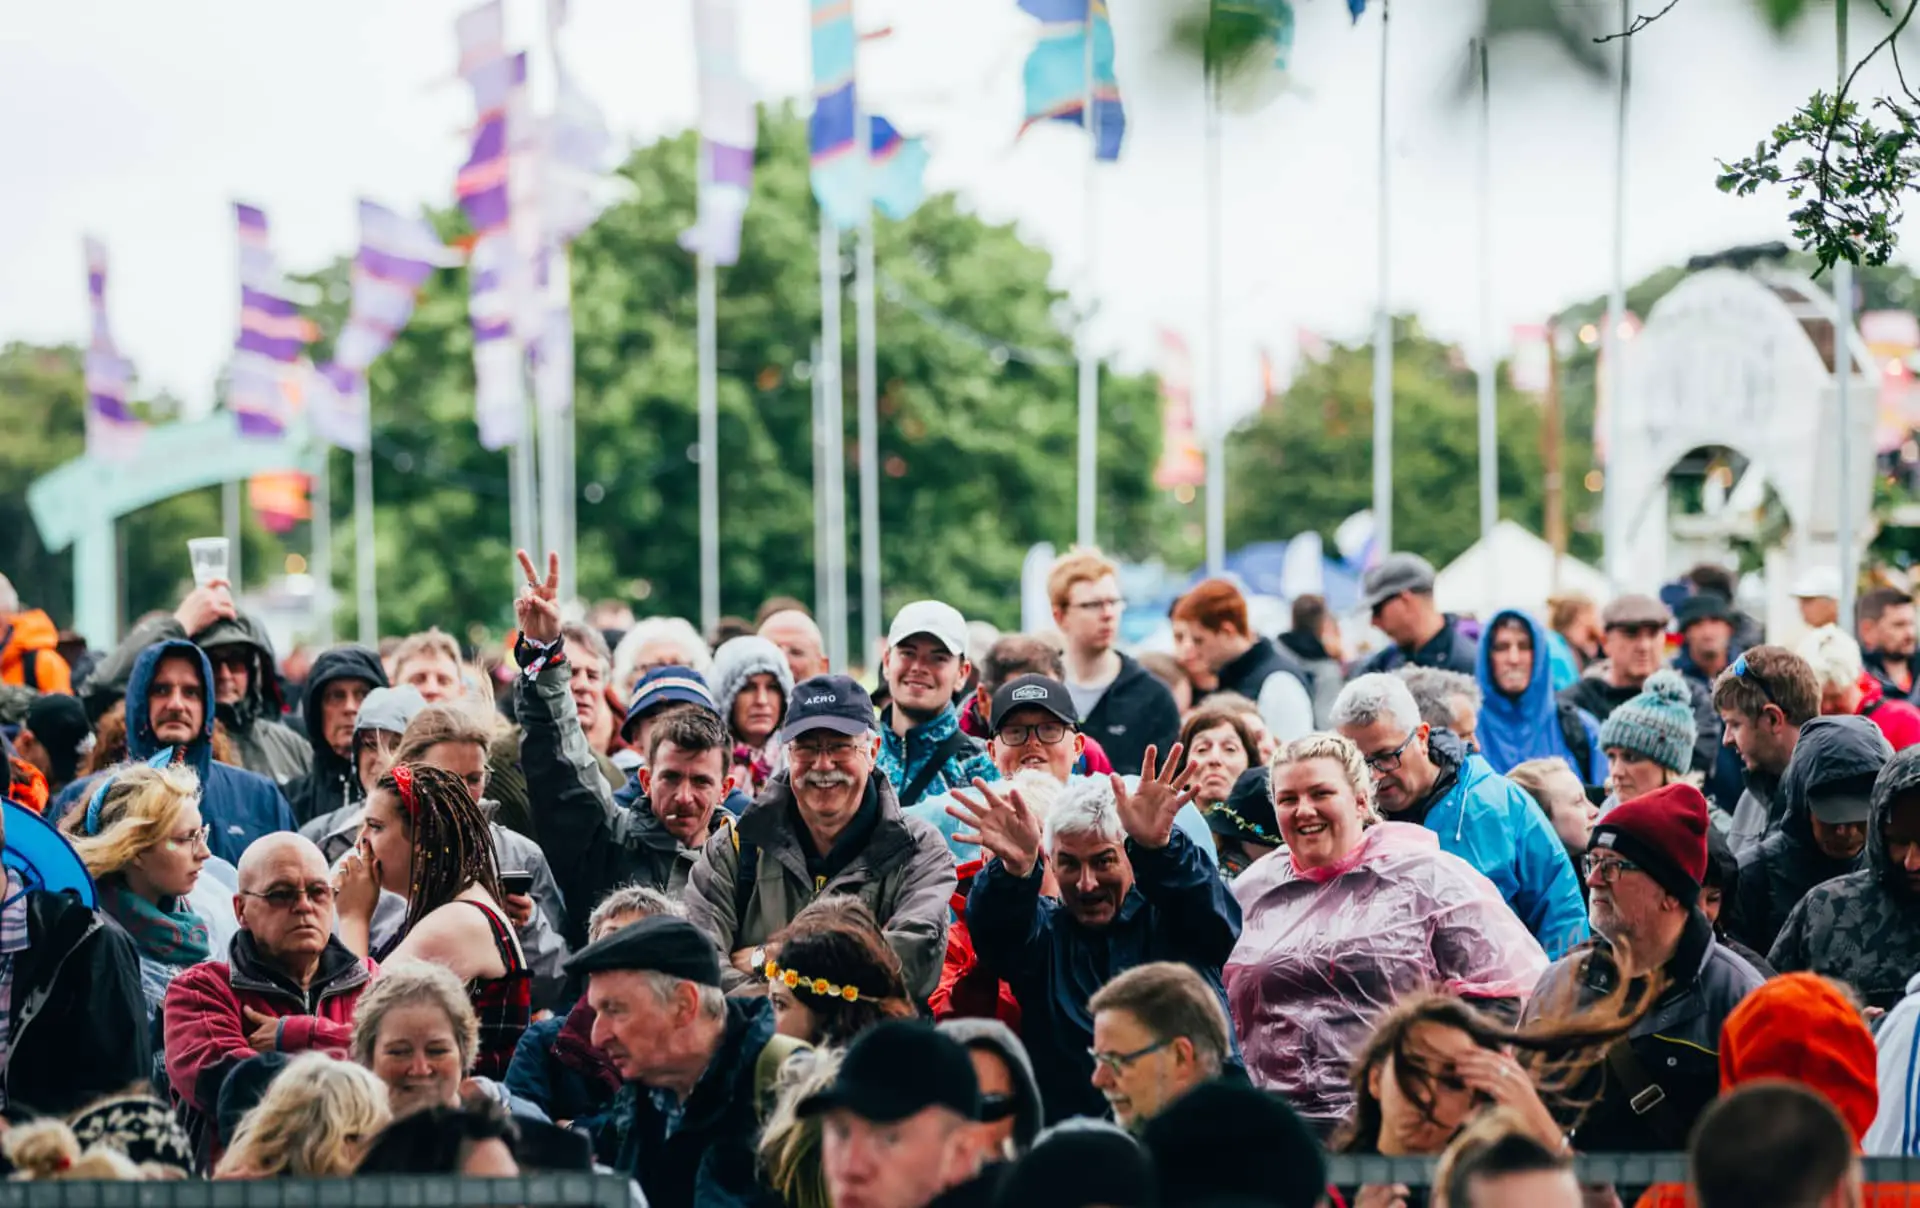 The audience at Isle of Wight Festival 2019